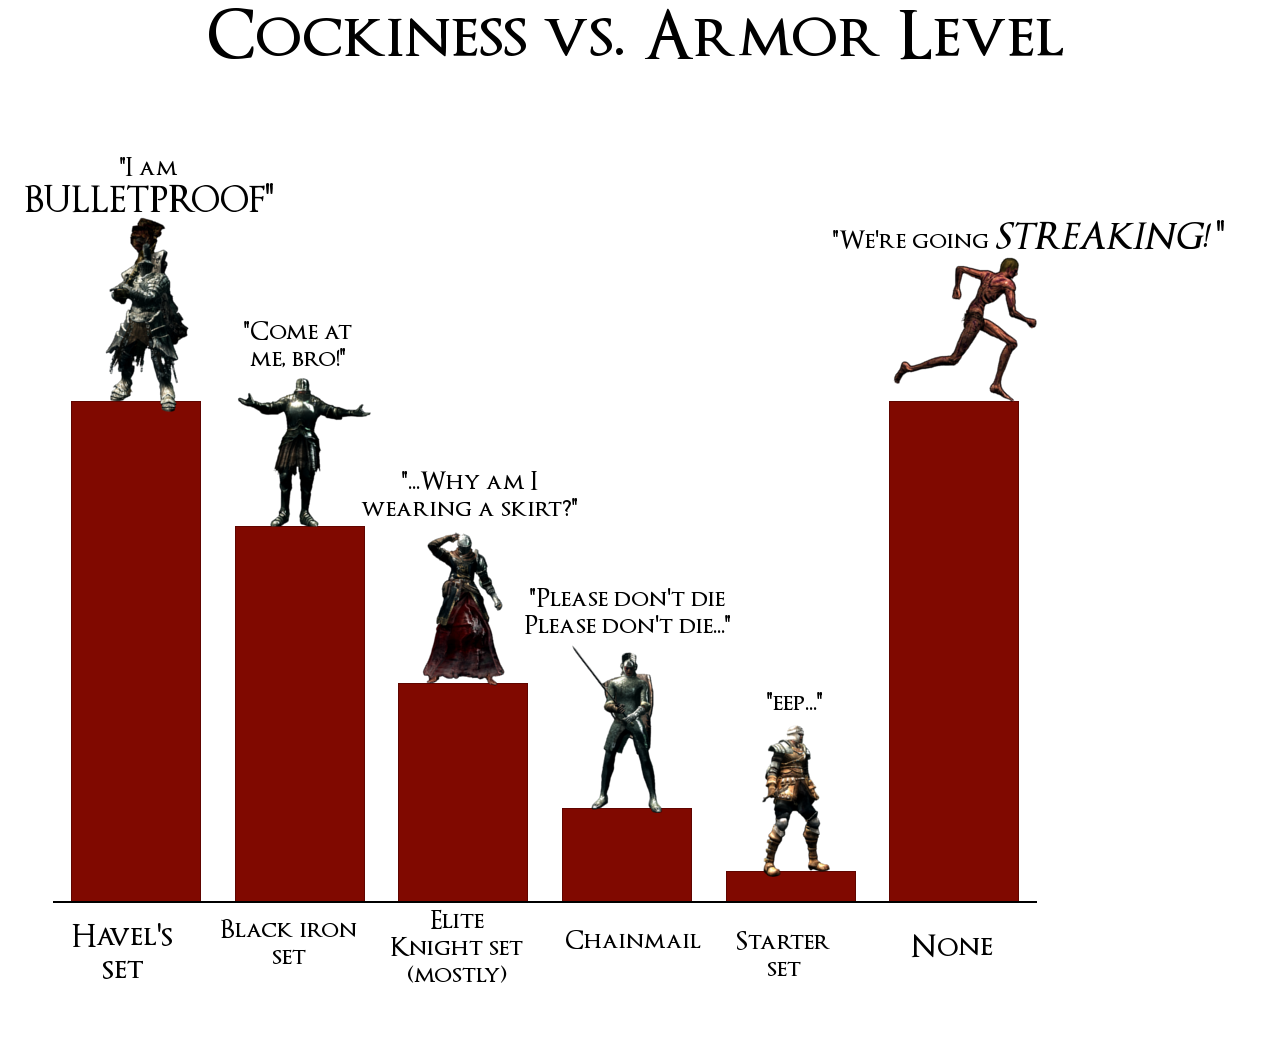 dark souls armor meme - Cockiness Vs. Armor Level "I Am Bulletproof" "We'Re Going Streaking!" "Come At Me, Bro!" "...Why Ami Wearing A Skirt?" "Please Don'T Die Please Don'T Die..." "Eep. Havel'S Set Black Iron Black Iron Set Elite Knight Set Mostly Chain